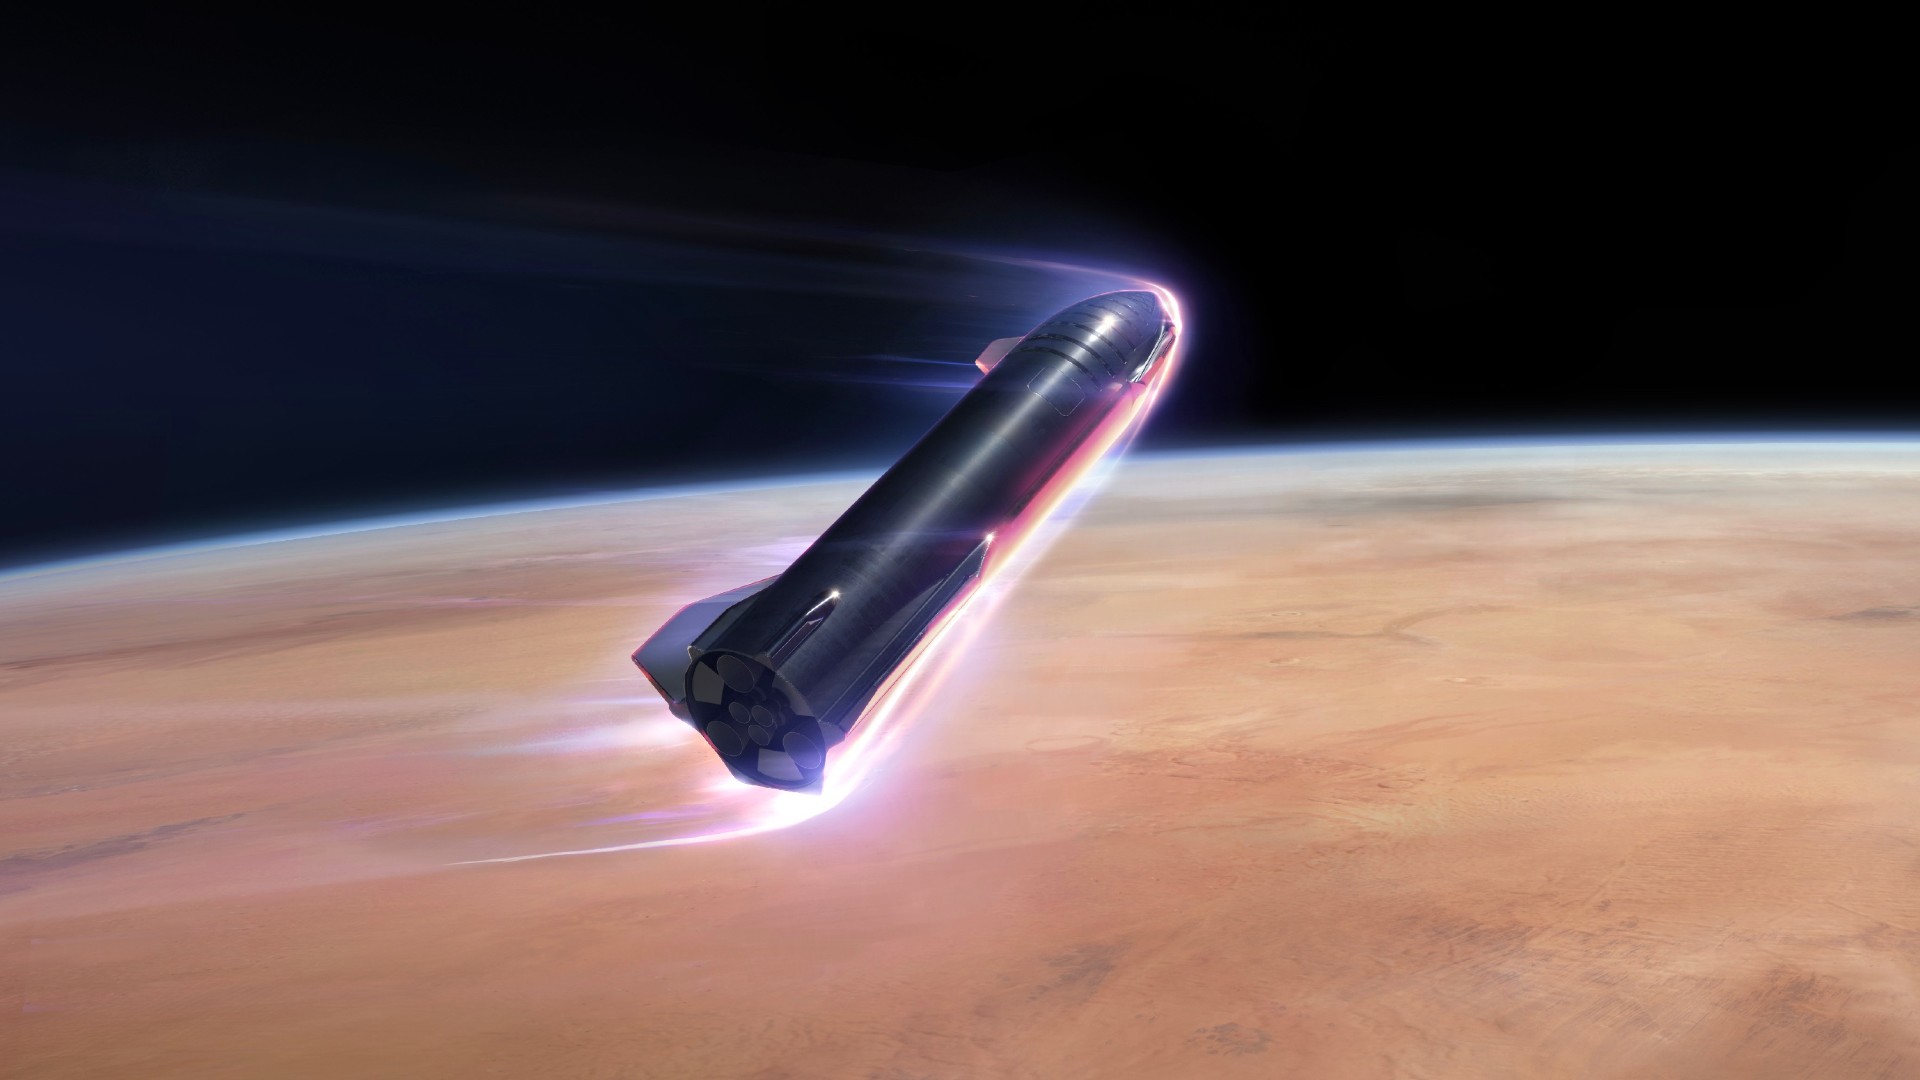 SpaceX plans to ‘spin’ Starship during future Mars voyages to create Artificial Gravity